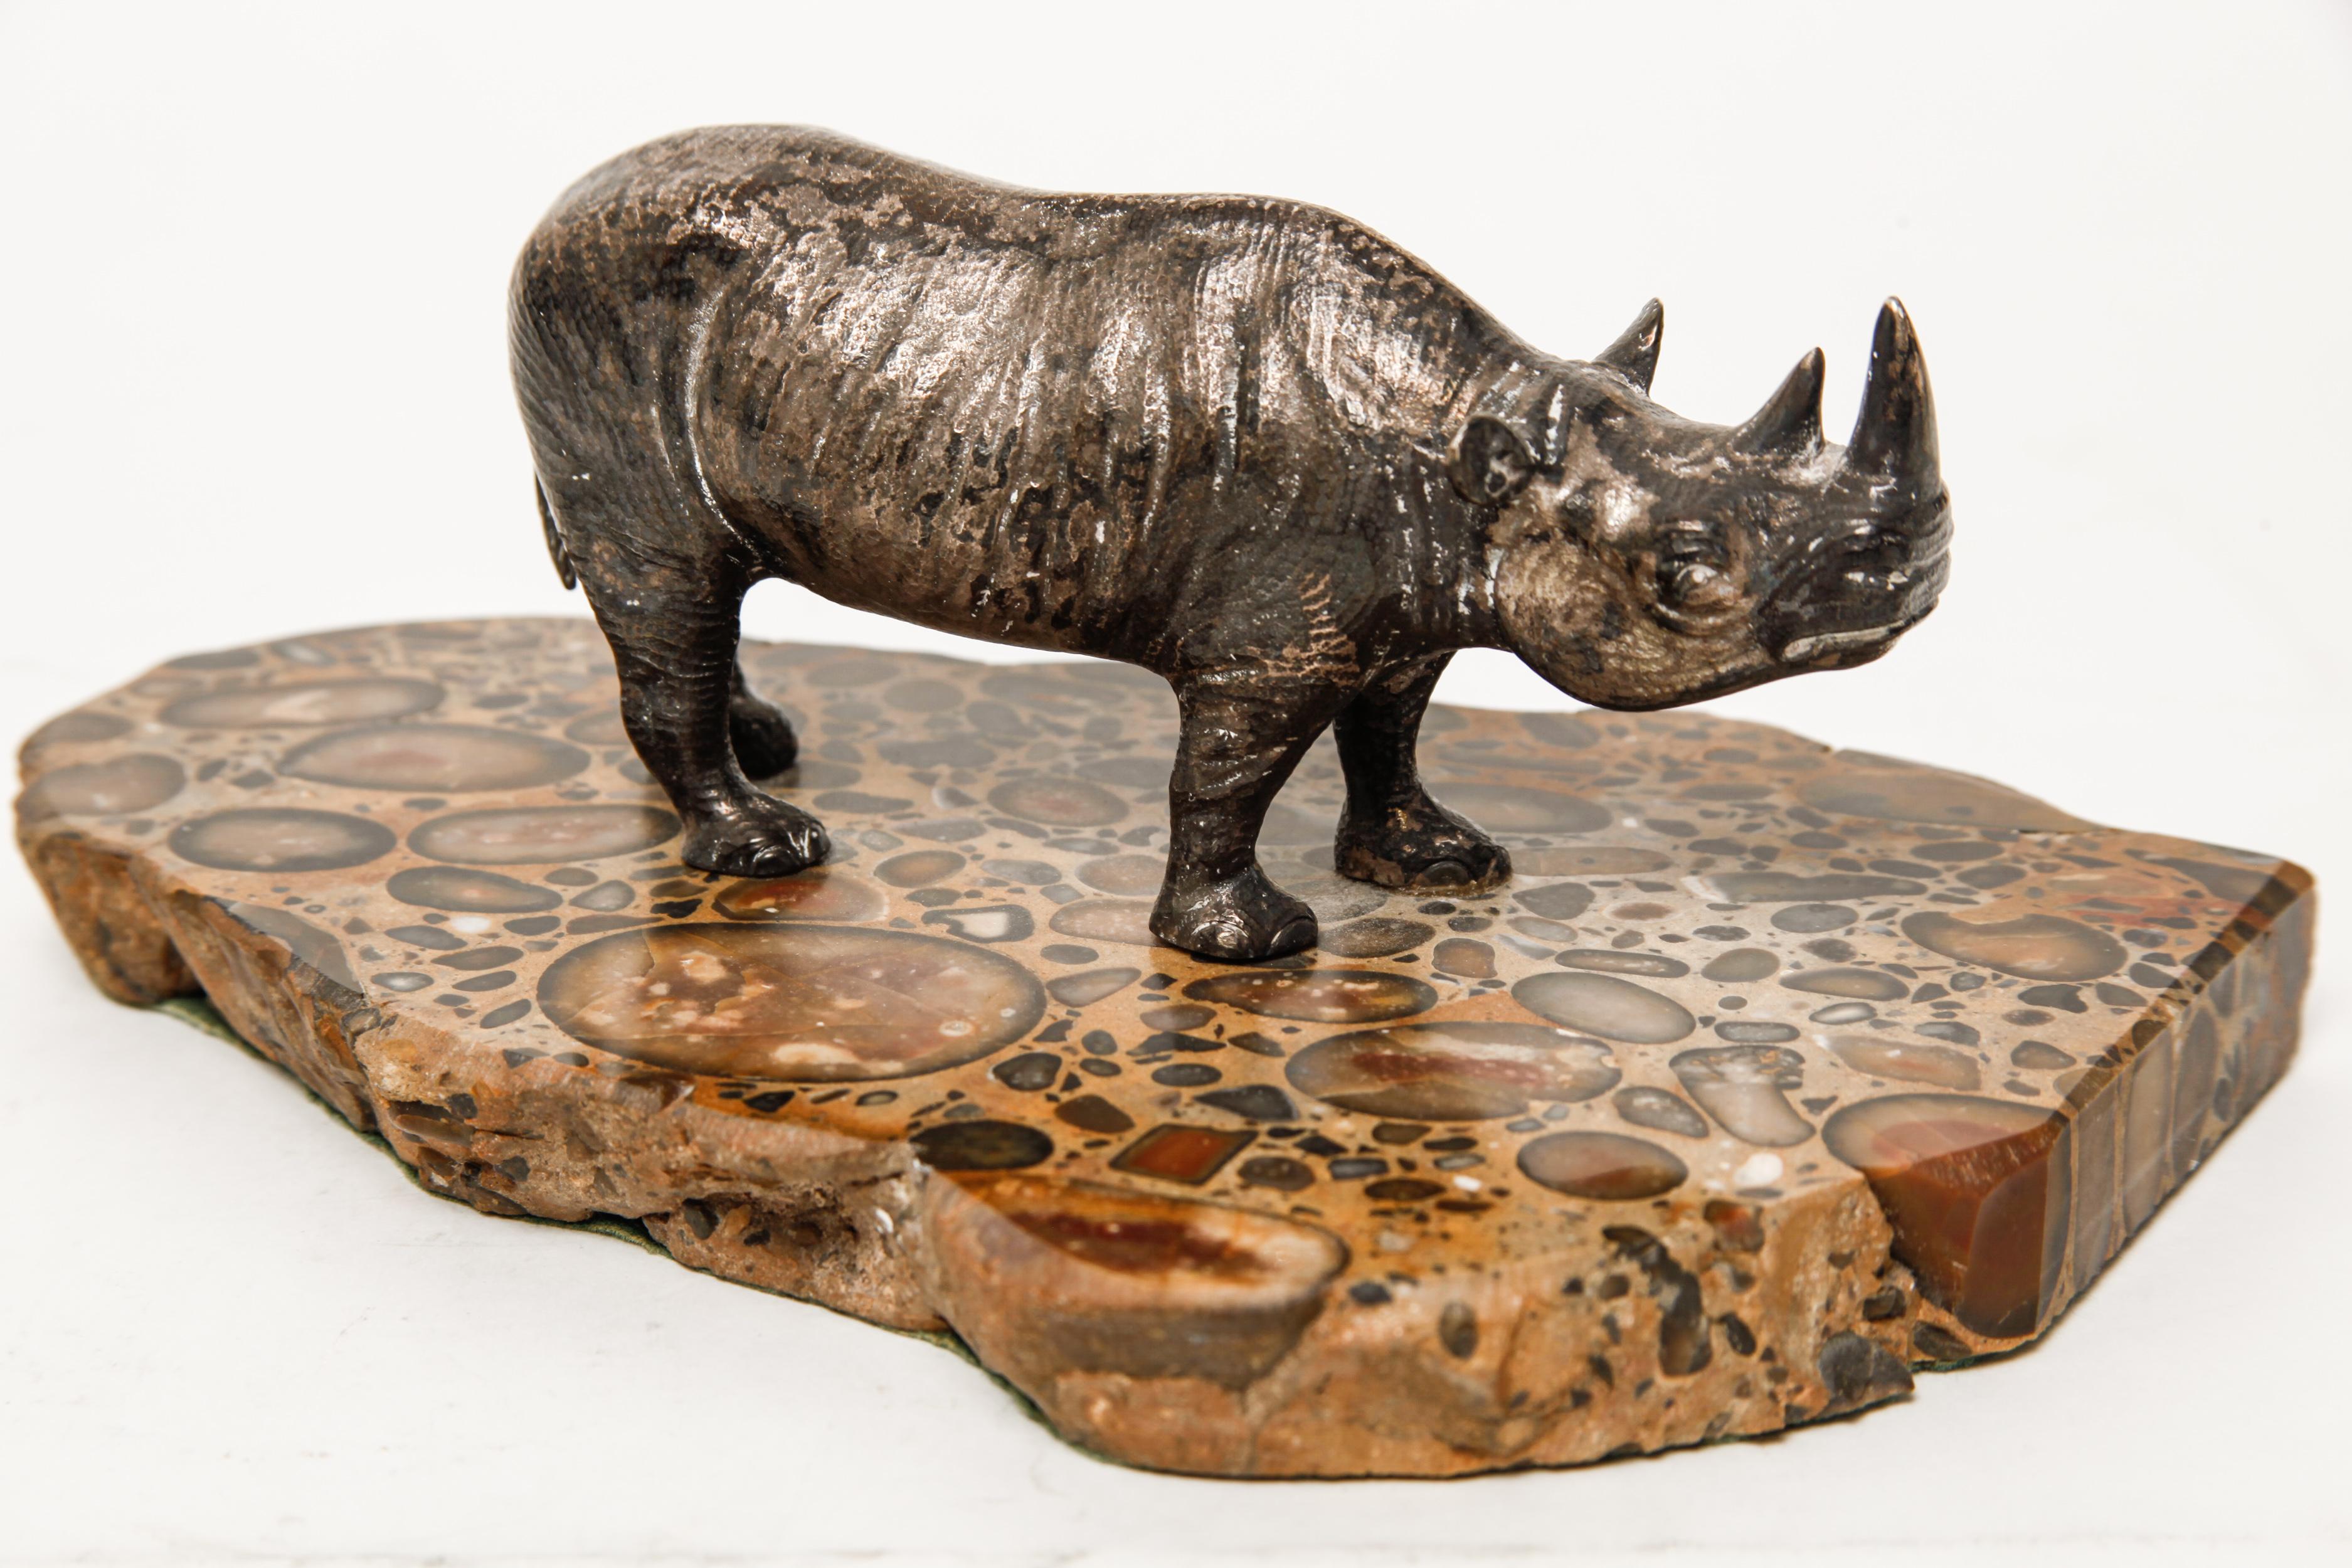 20th Century Mid-Century Modern Silver Plated Rhinoceros Sculpture on Marble Base